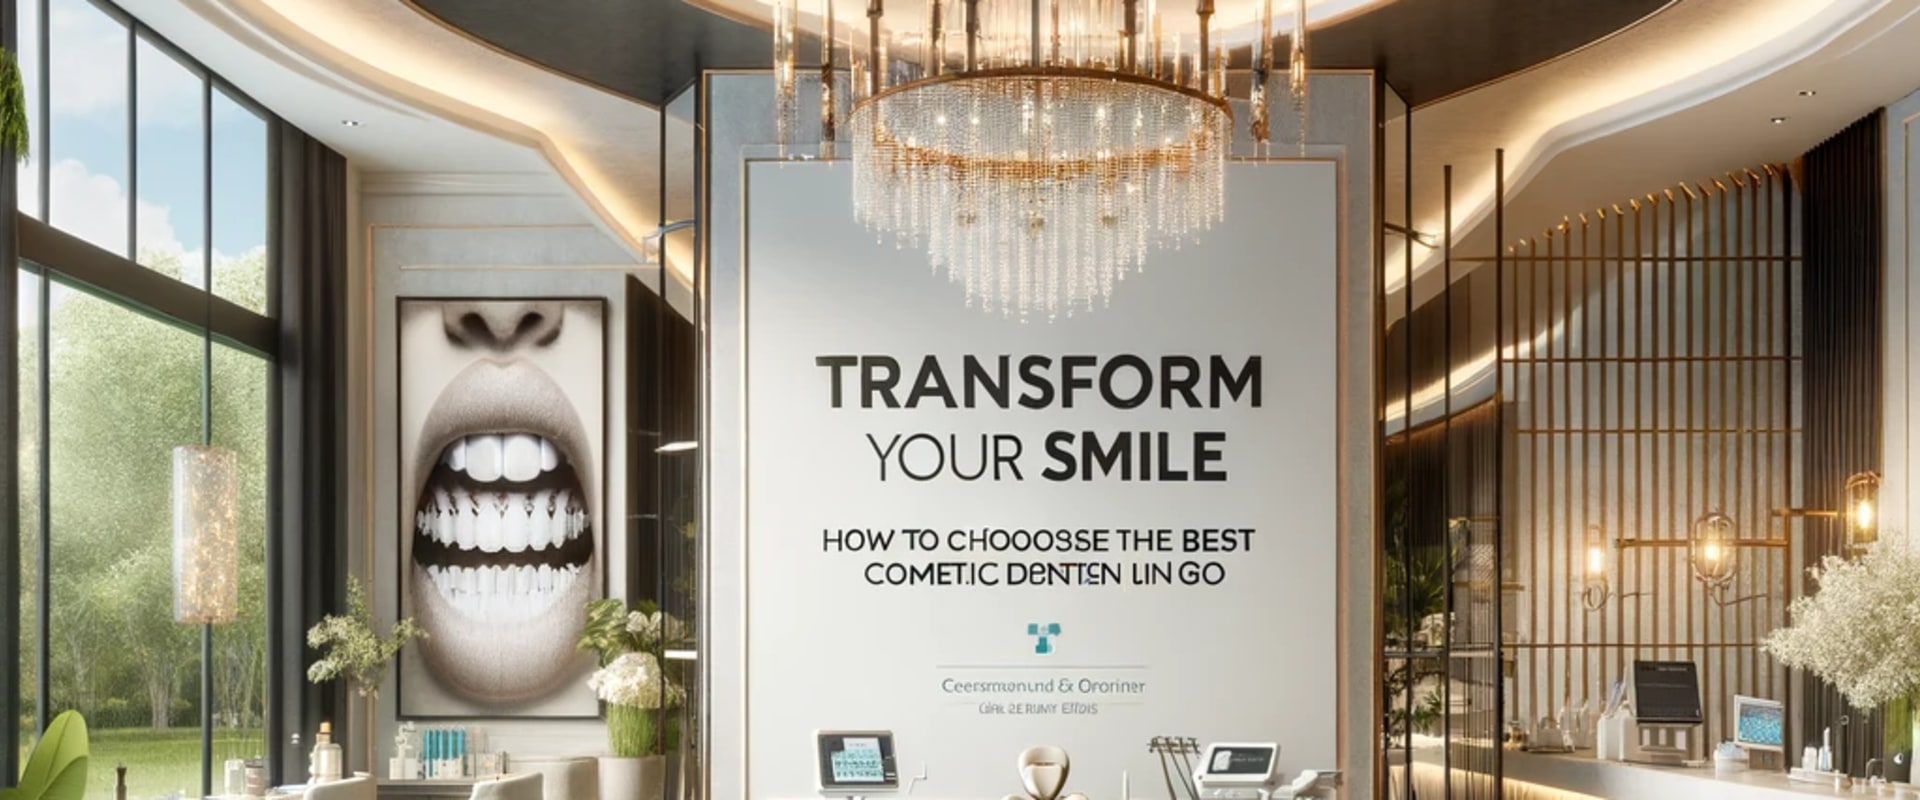 Transform Your Smile: How to Choose the Best Cosmetic Dentist in San Diego